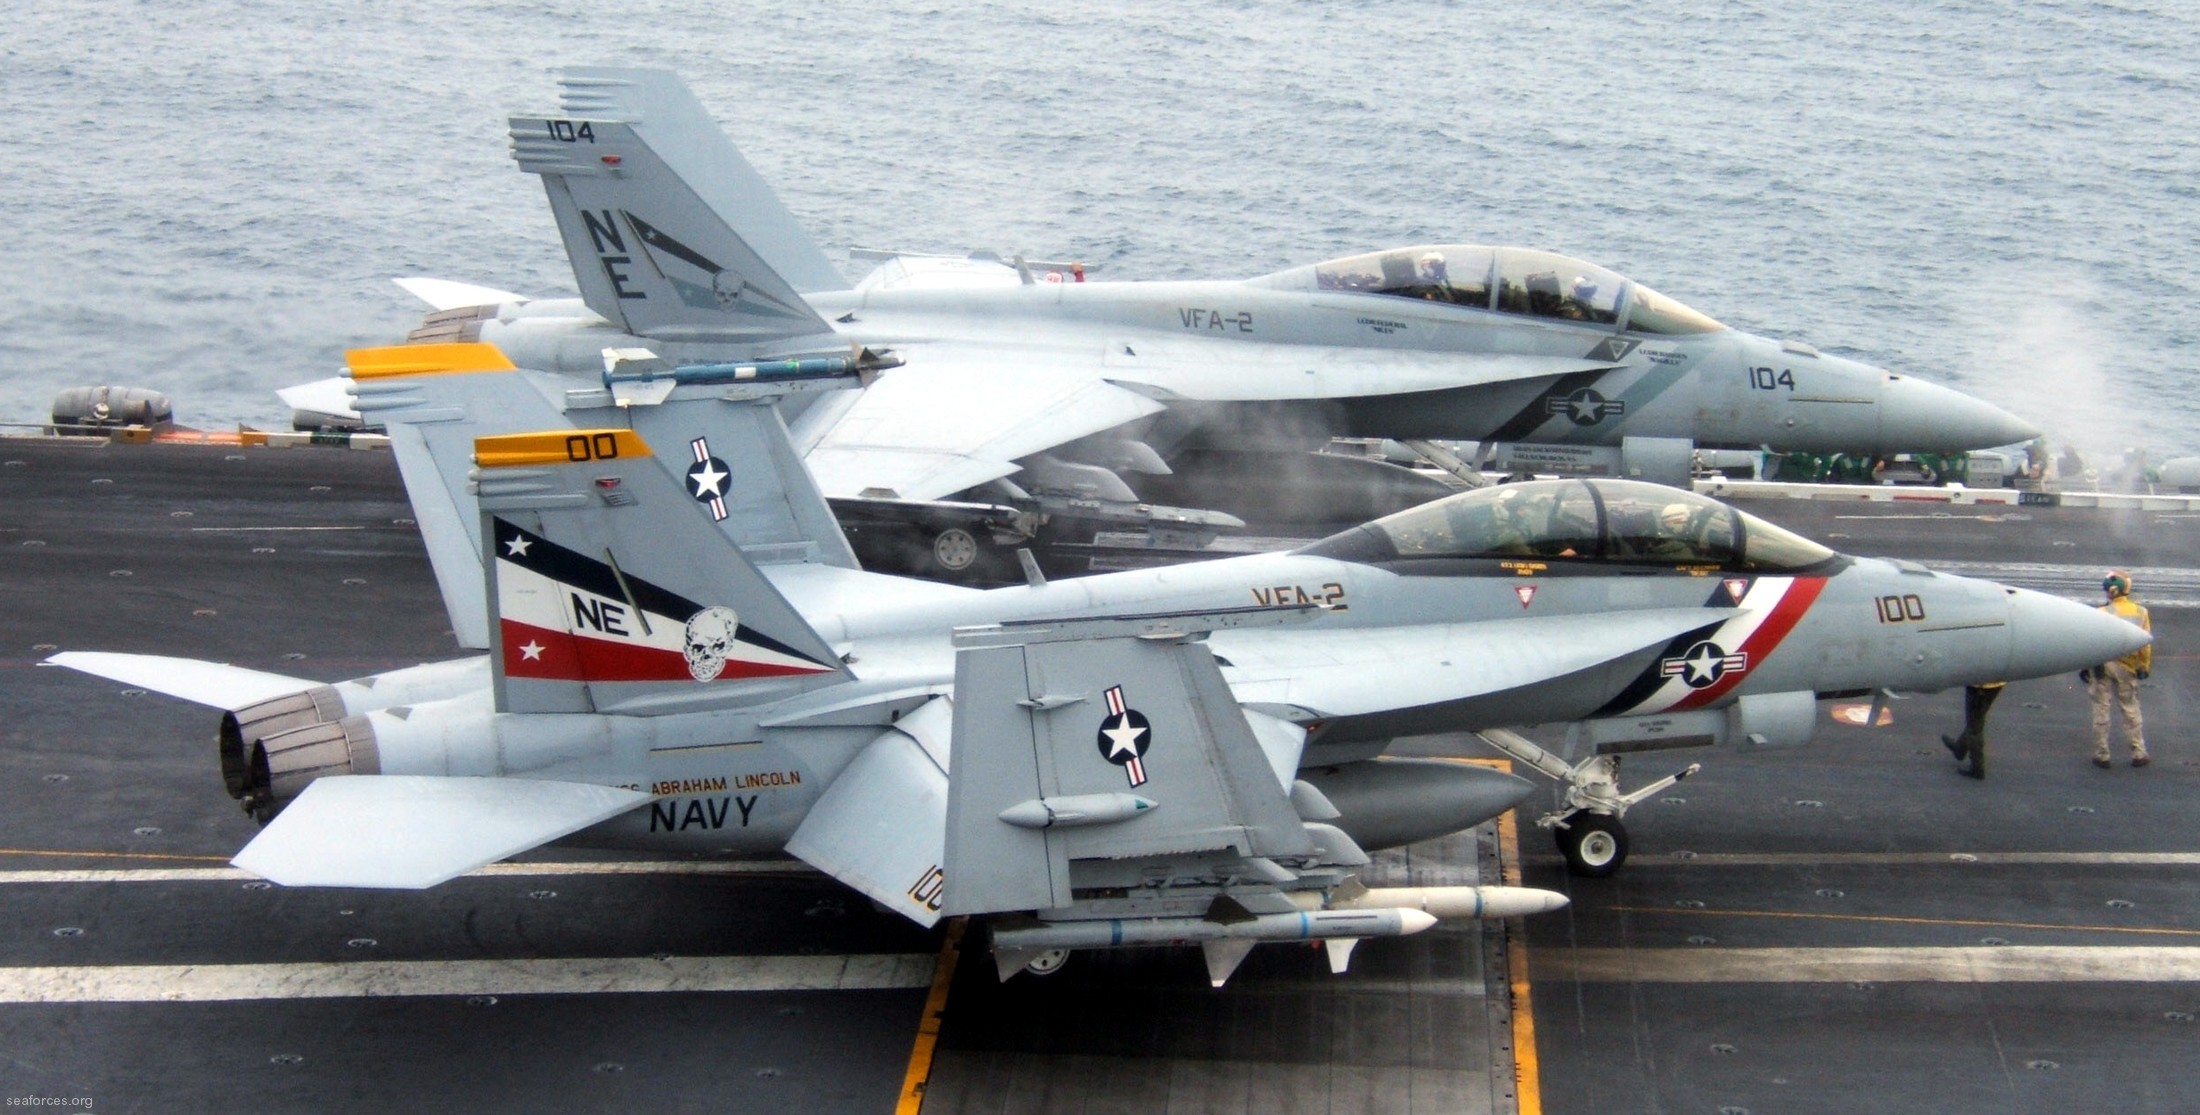 vfa-2 bounty hunters strike fighter squadron us navy f/a-18f super hornet carrier air wing cvw-2 uss abraham lincoln cvn-72 89